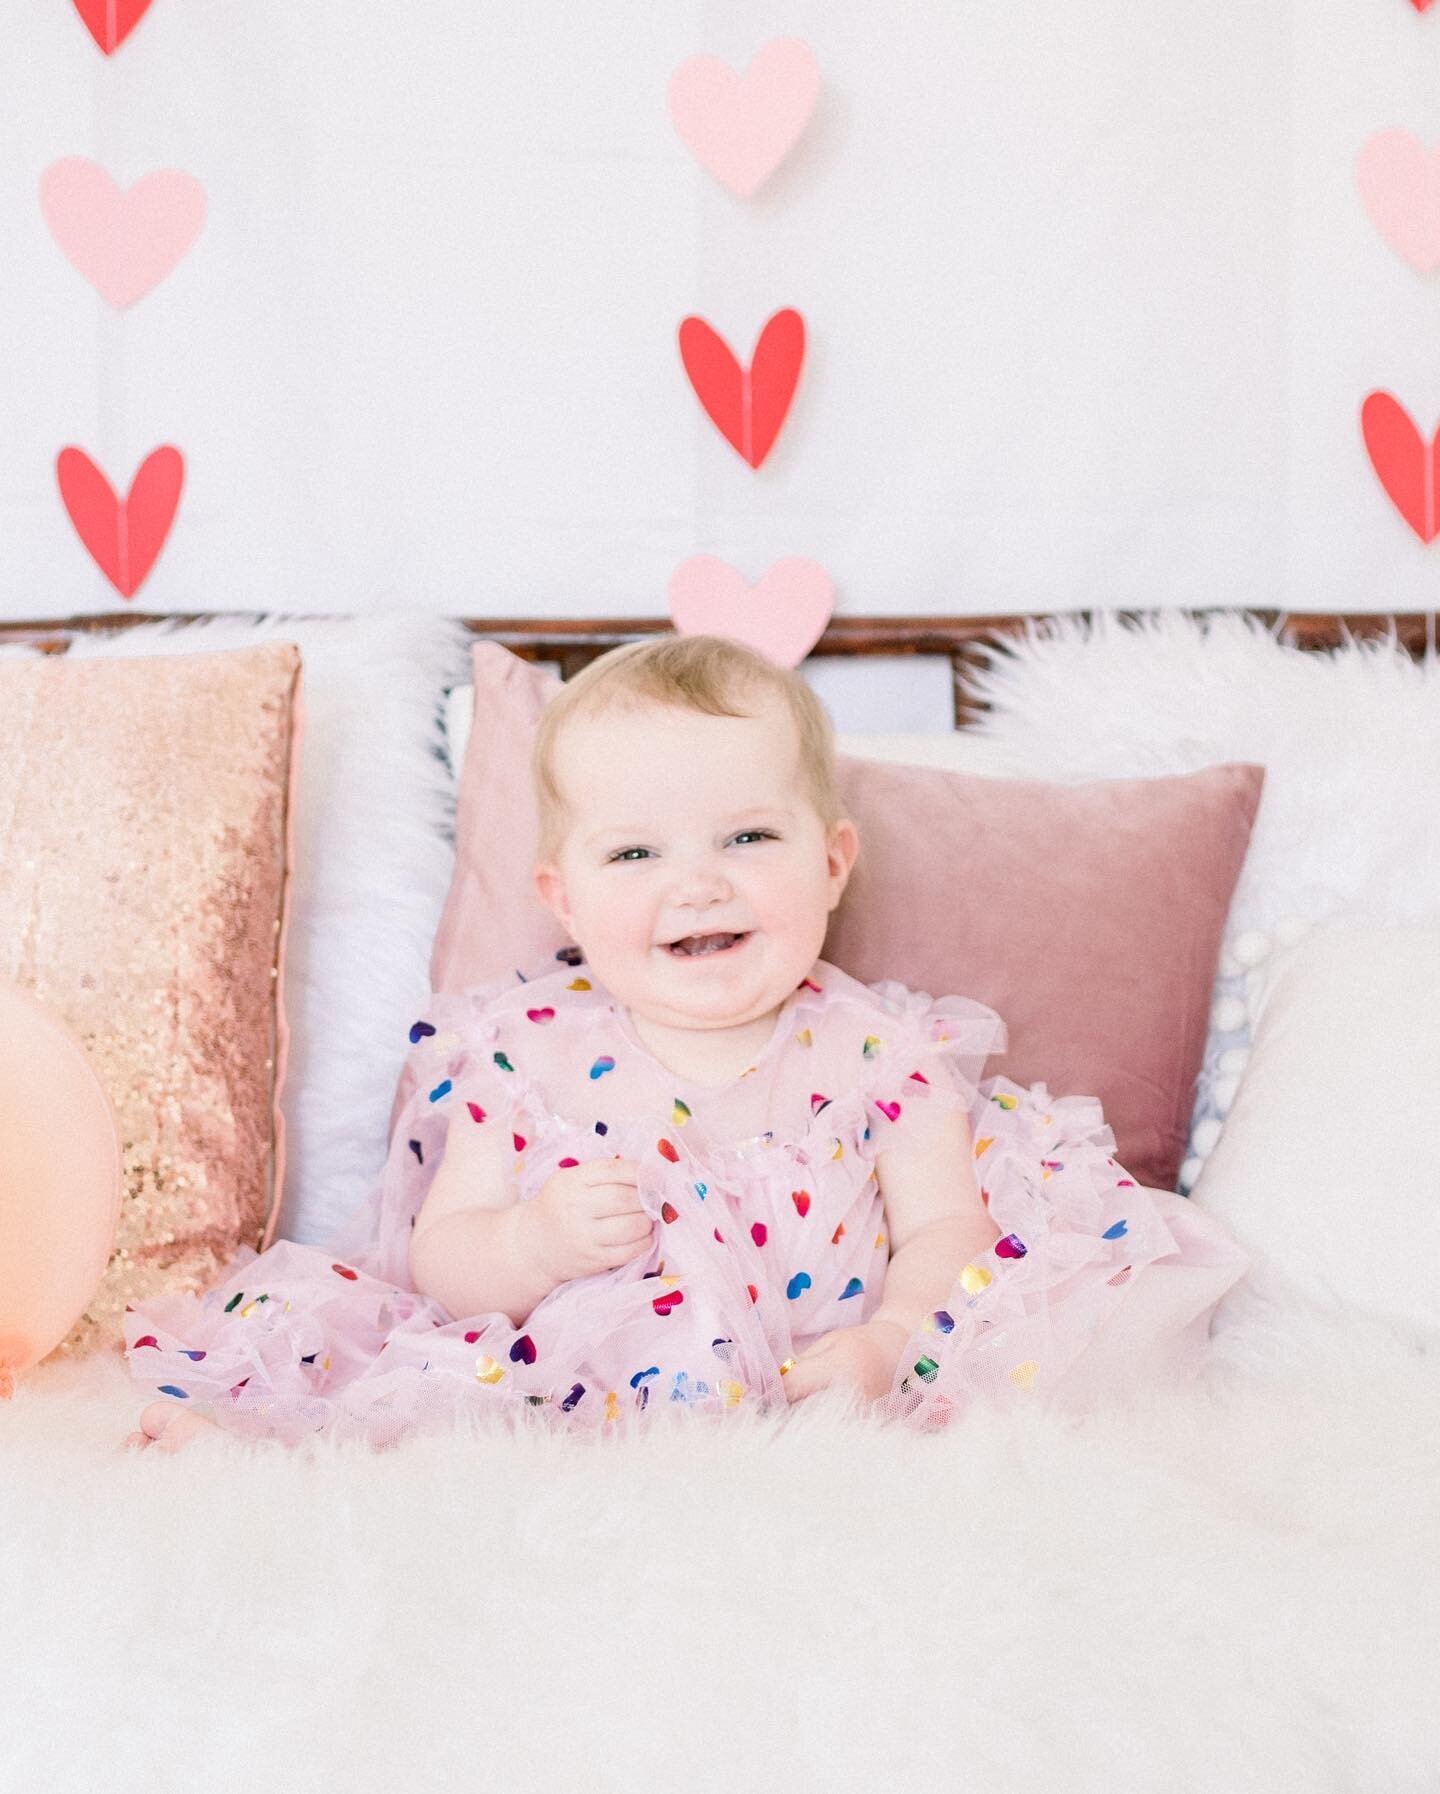 Surprise Valentine&rsquo;s Day photos for Dada! We love you, @ryanokane4arbor 💕❤️ and thank you @devynleonephoto for these beauties, as usual!